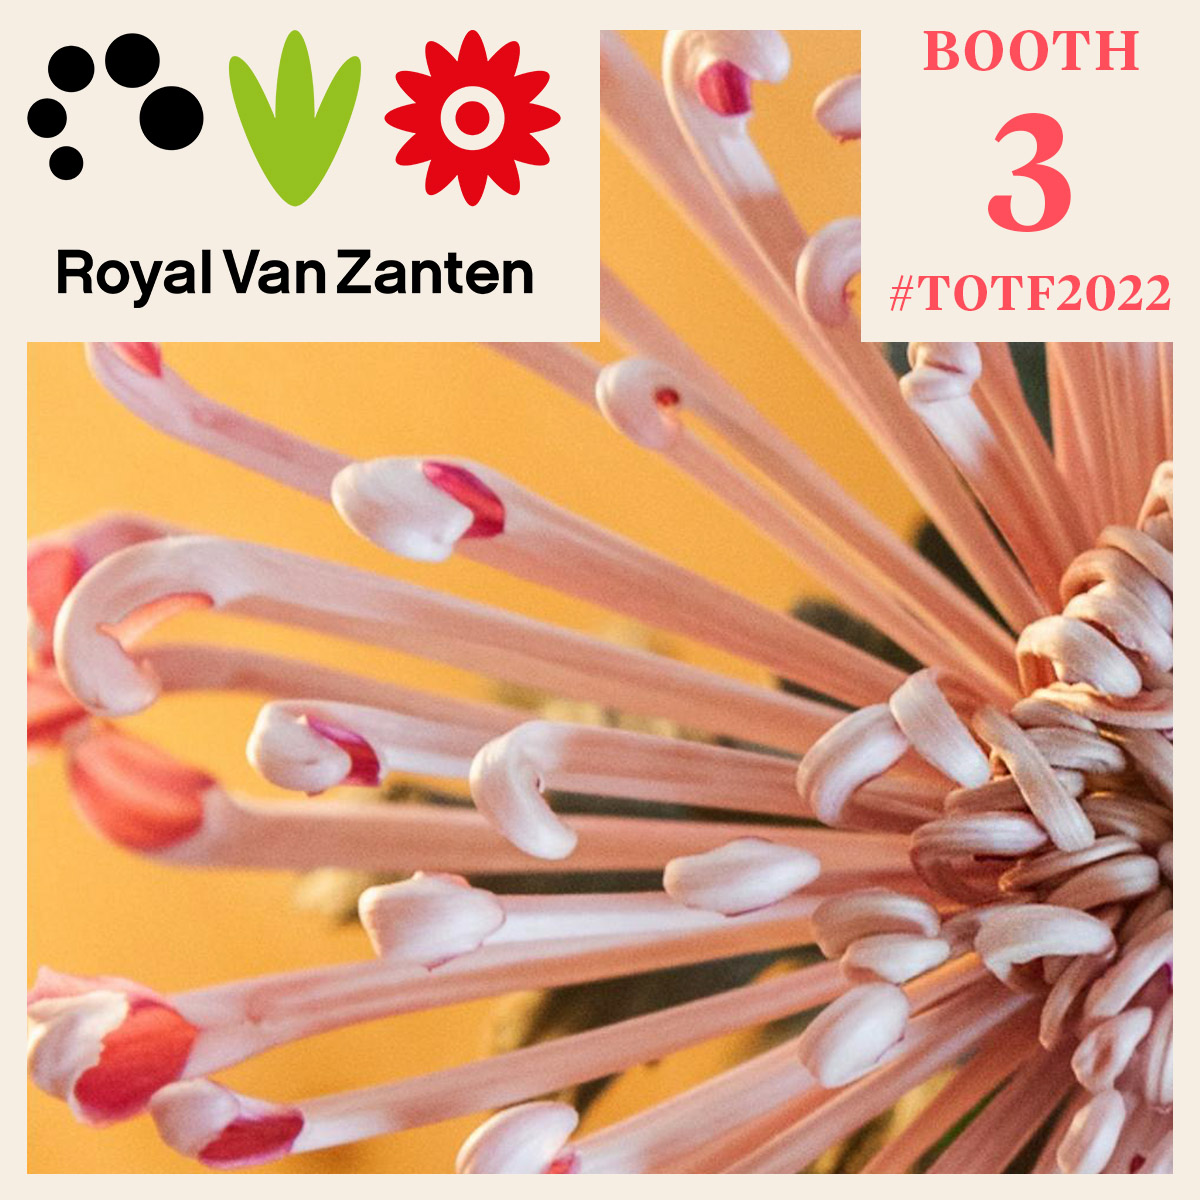 totf2022-we-stay-on-top-of-your-game-with-the-new-royal-van-zanten-varieties-featured